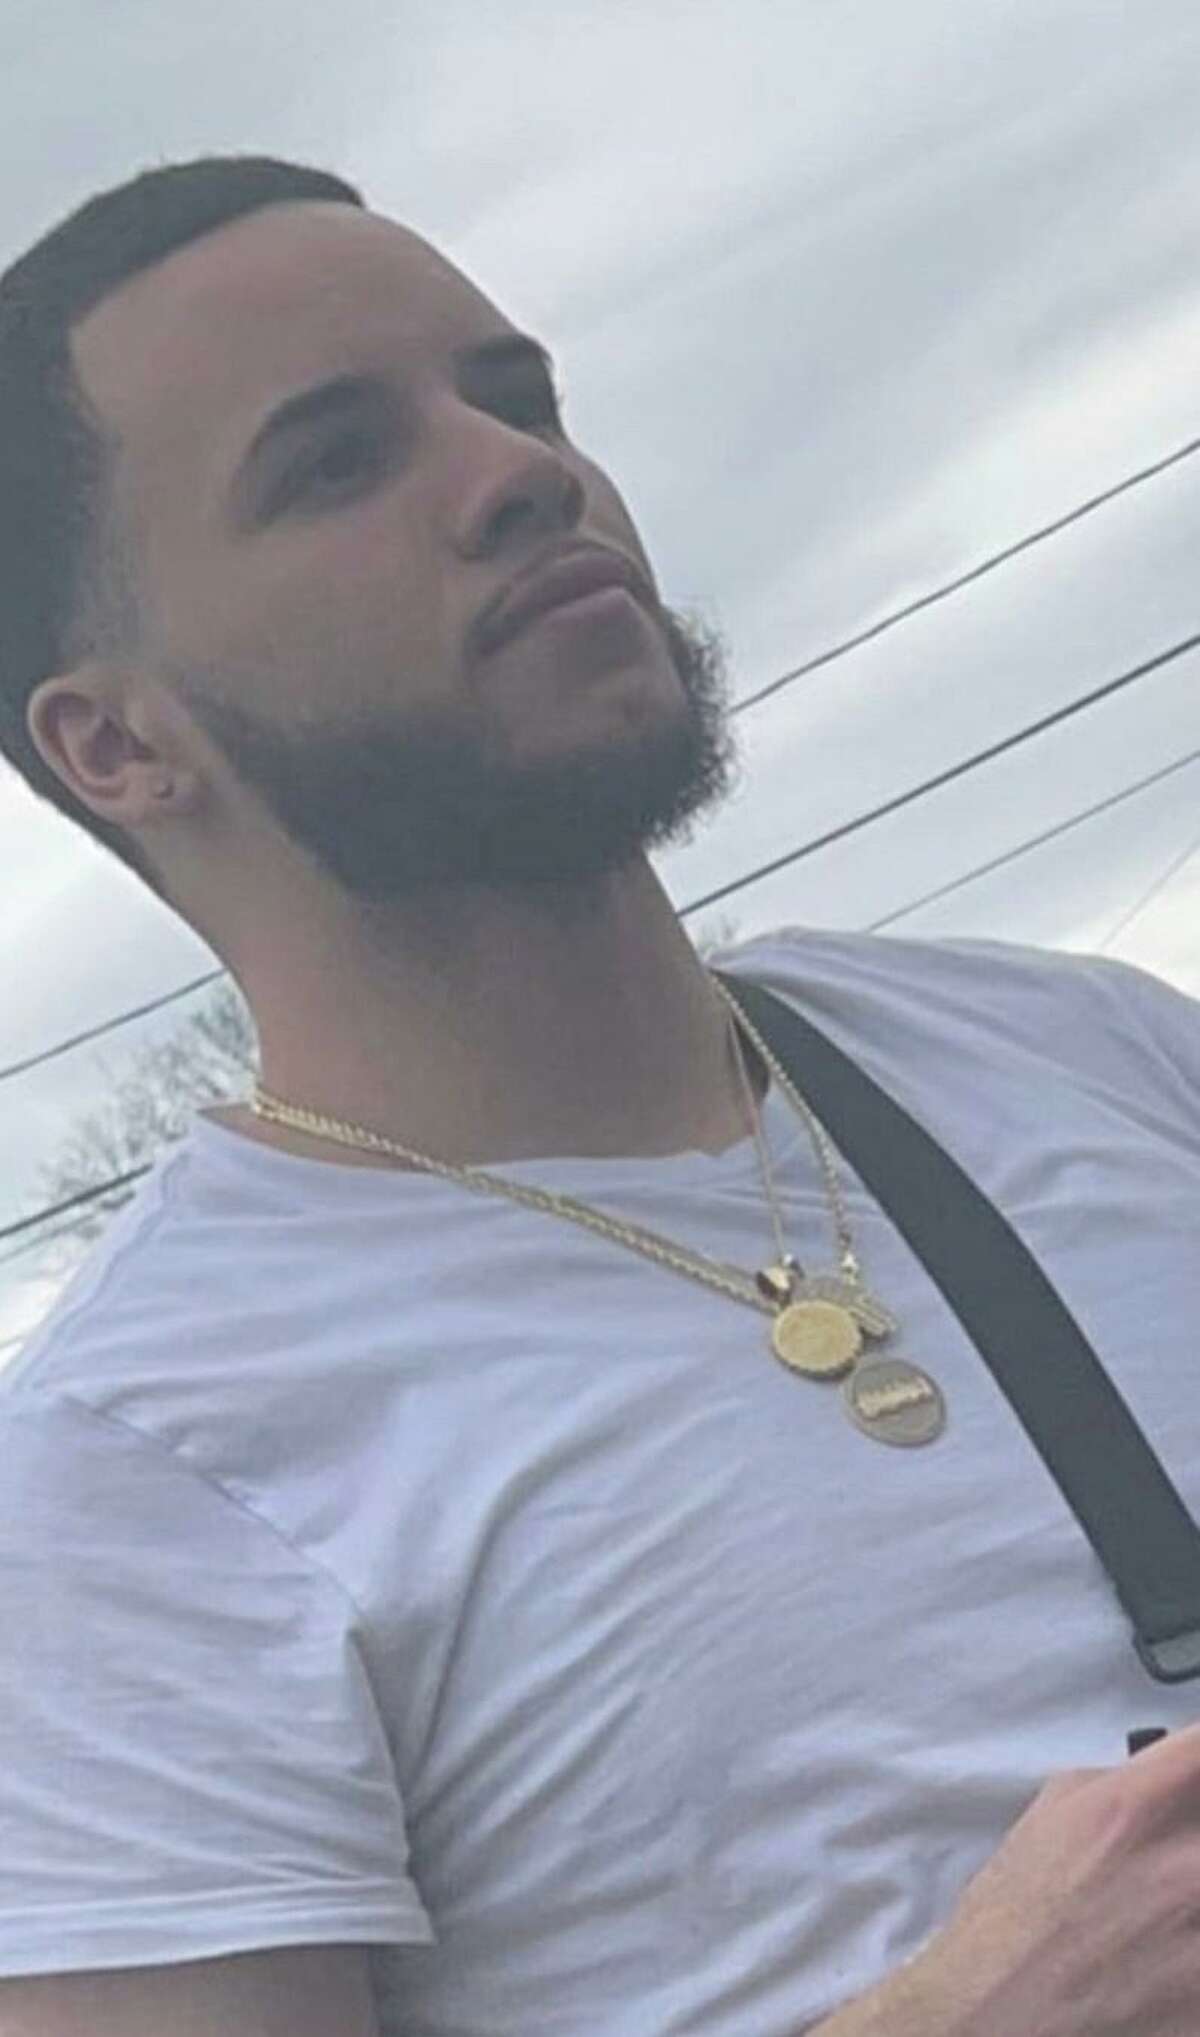 Carlos Reyes, 20, was last seen by family members around 11 p.m. March 28, 2022. His unoccupied vehicle was found on fire in Brewster, N.Y., the next night.